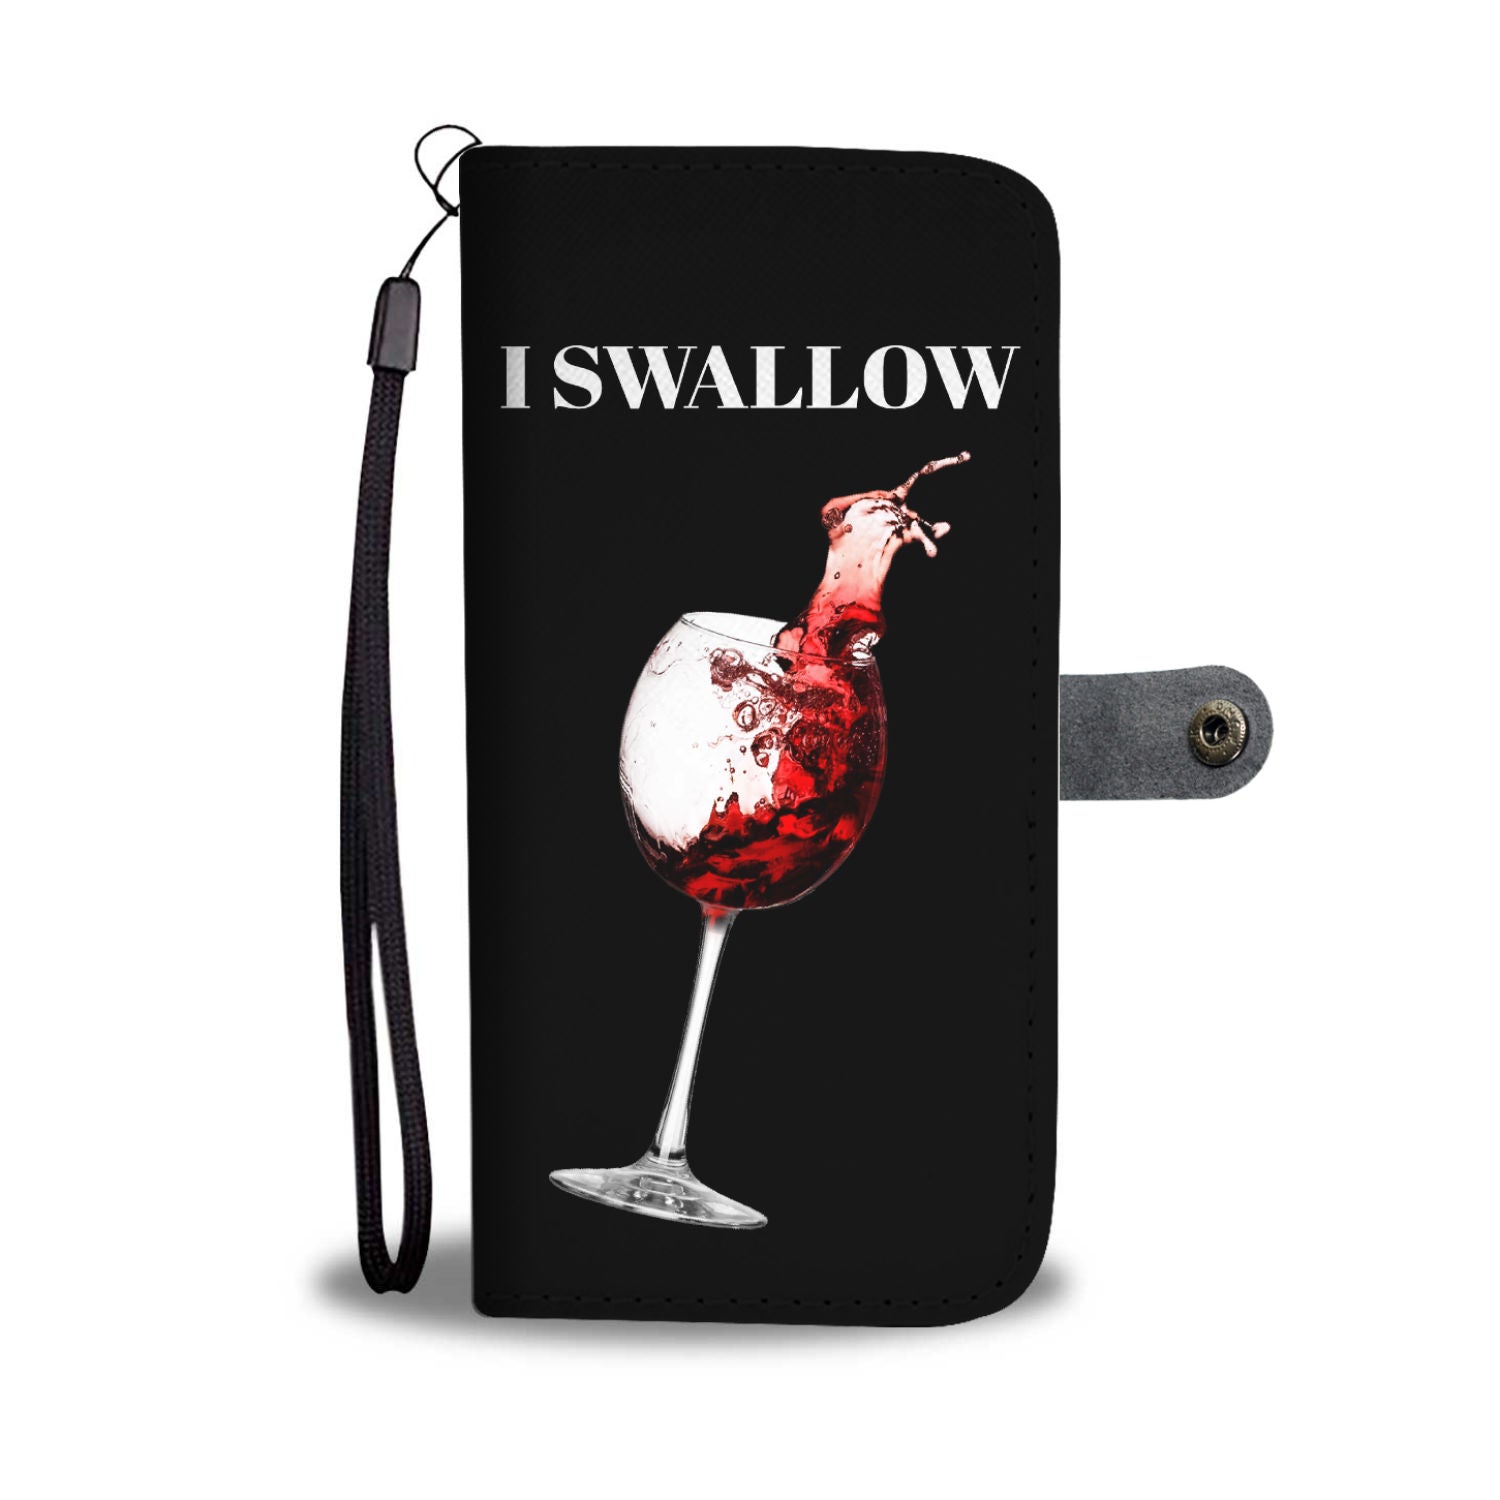 I Swallow Wallet Phone Case